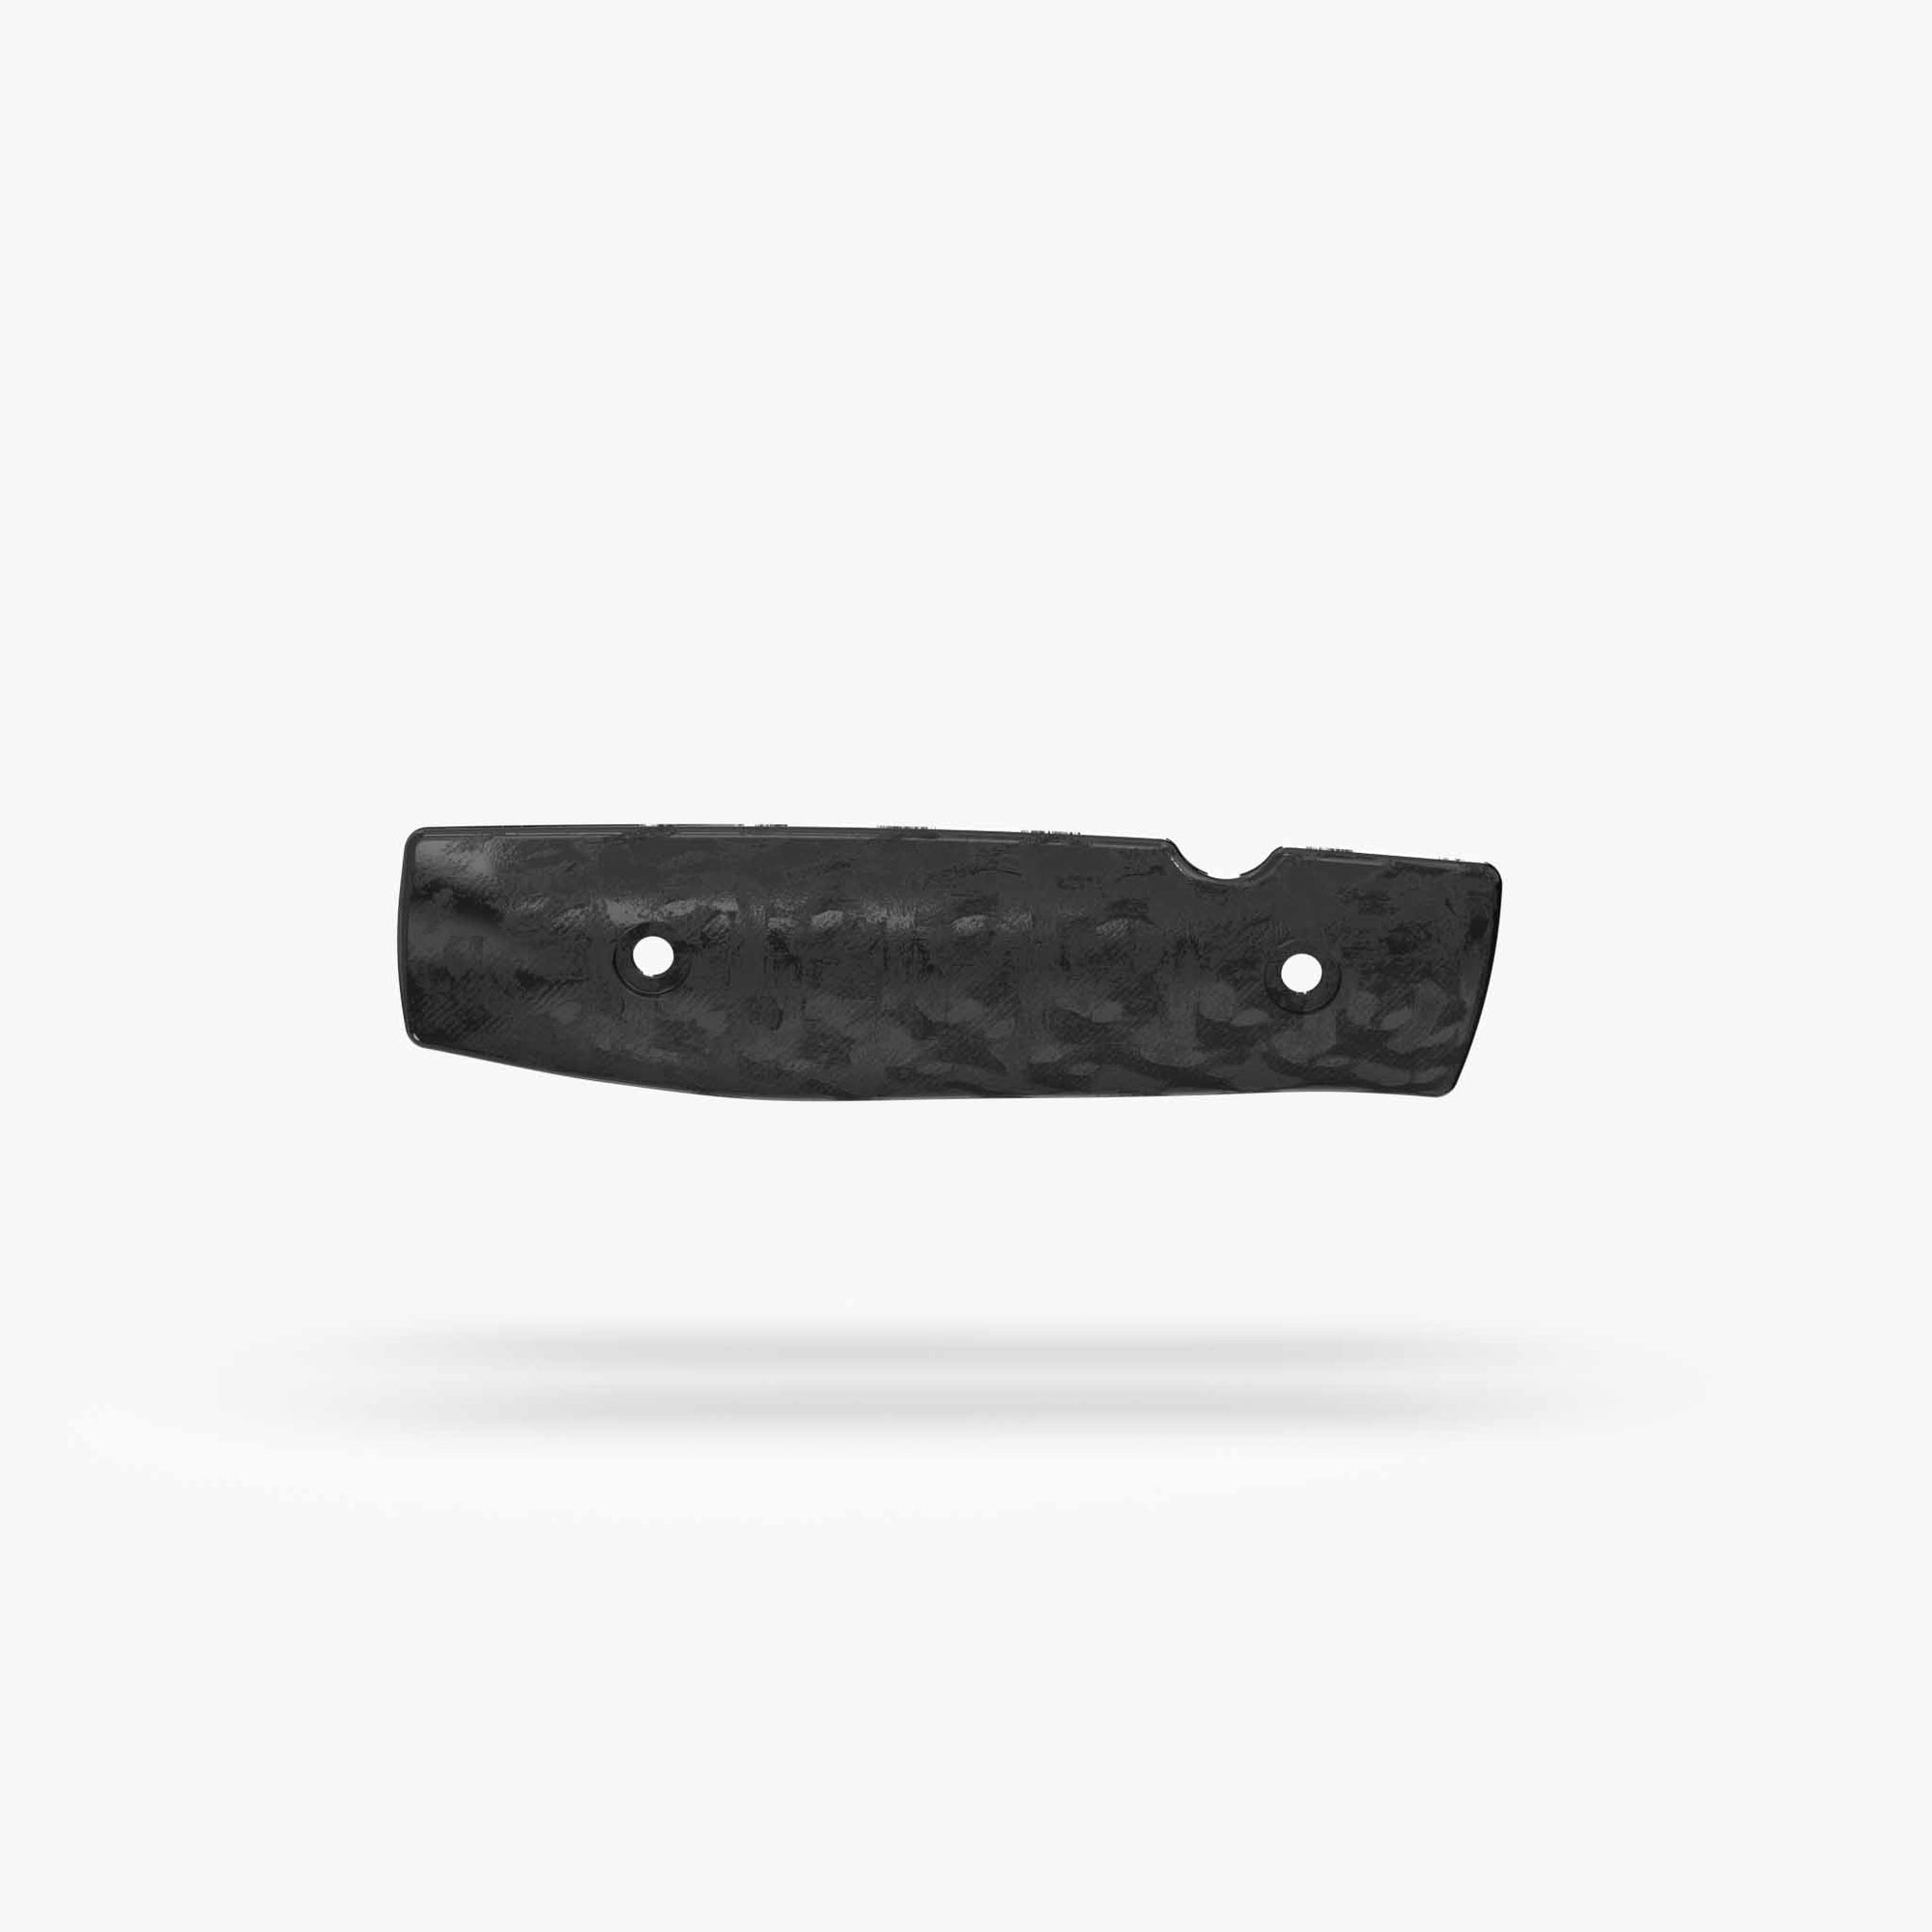 Modulator Inlay for Benchmade Bugout Scales